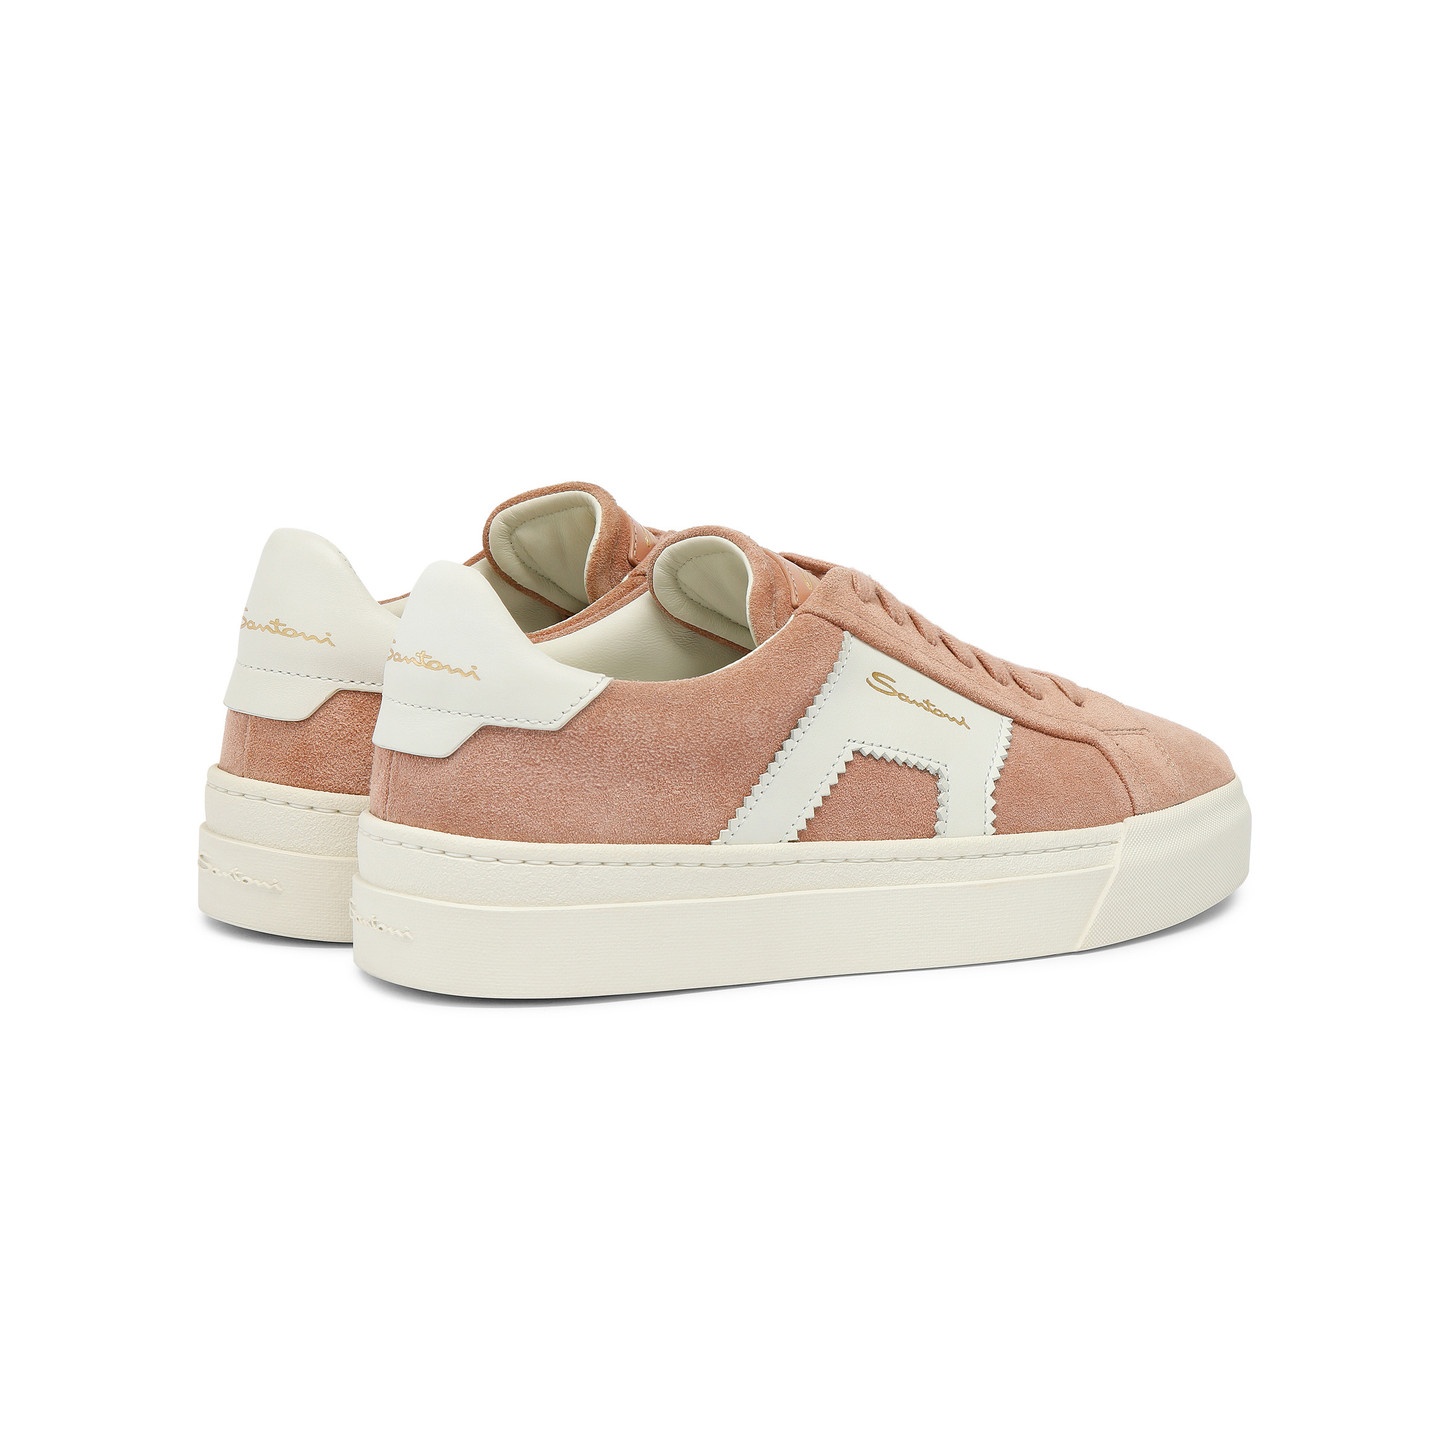 Women’s pink and white suede and leather double buckle sneaker - 4